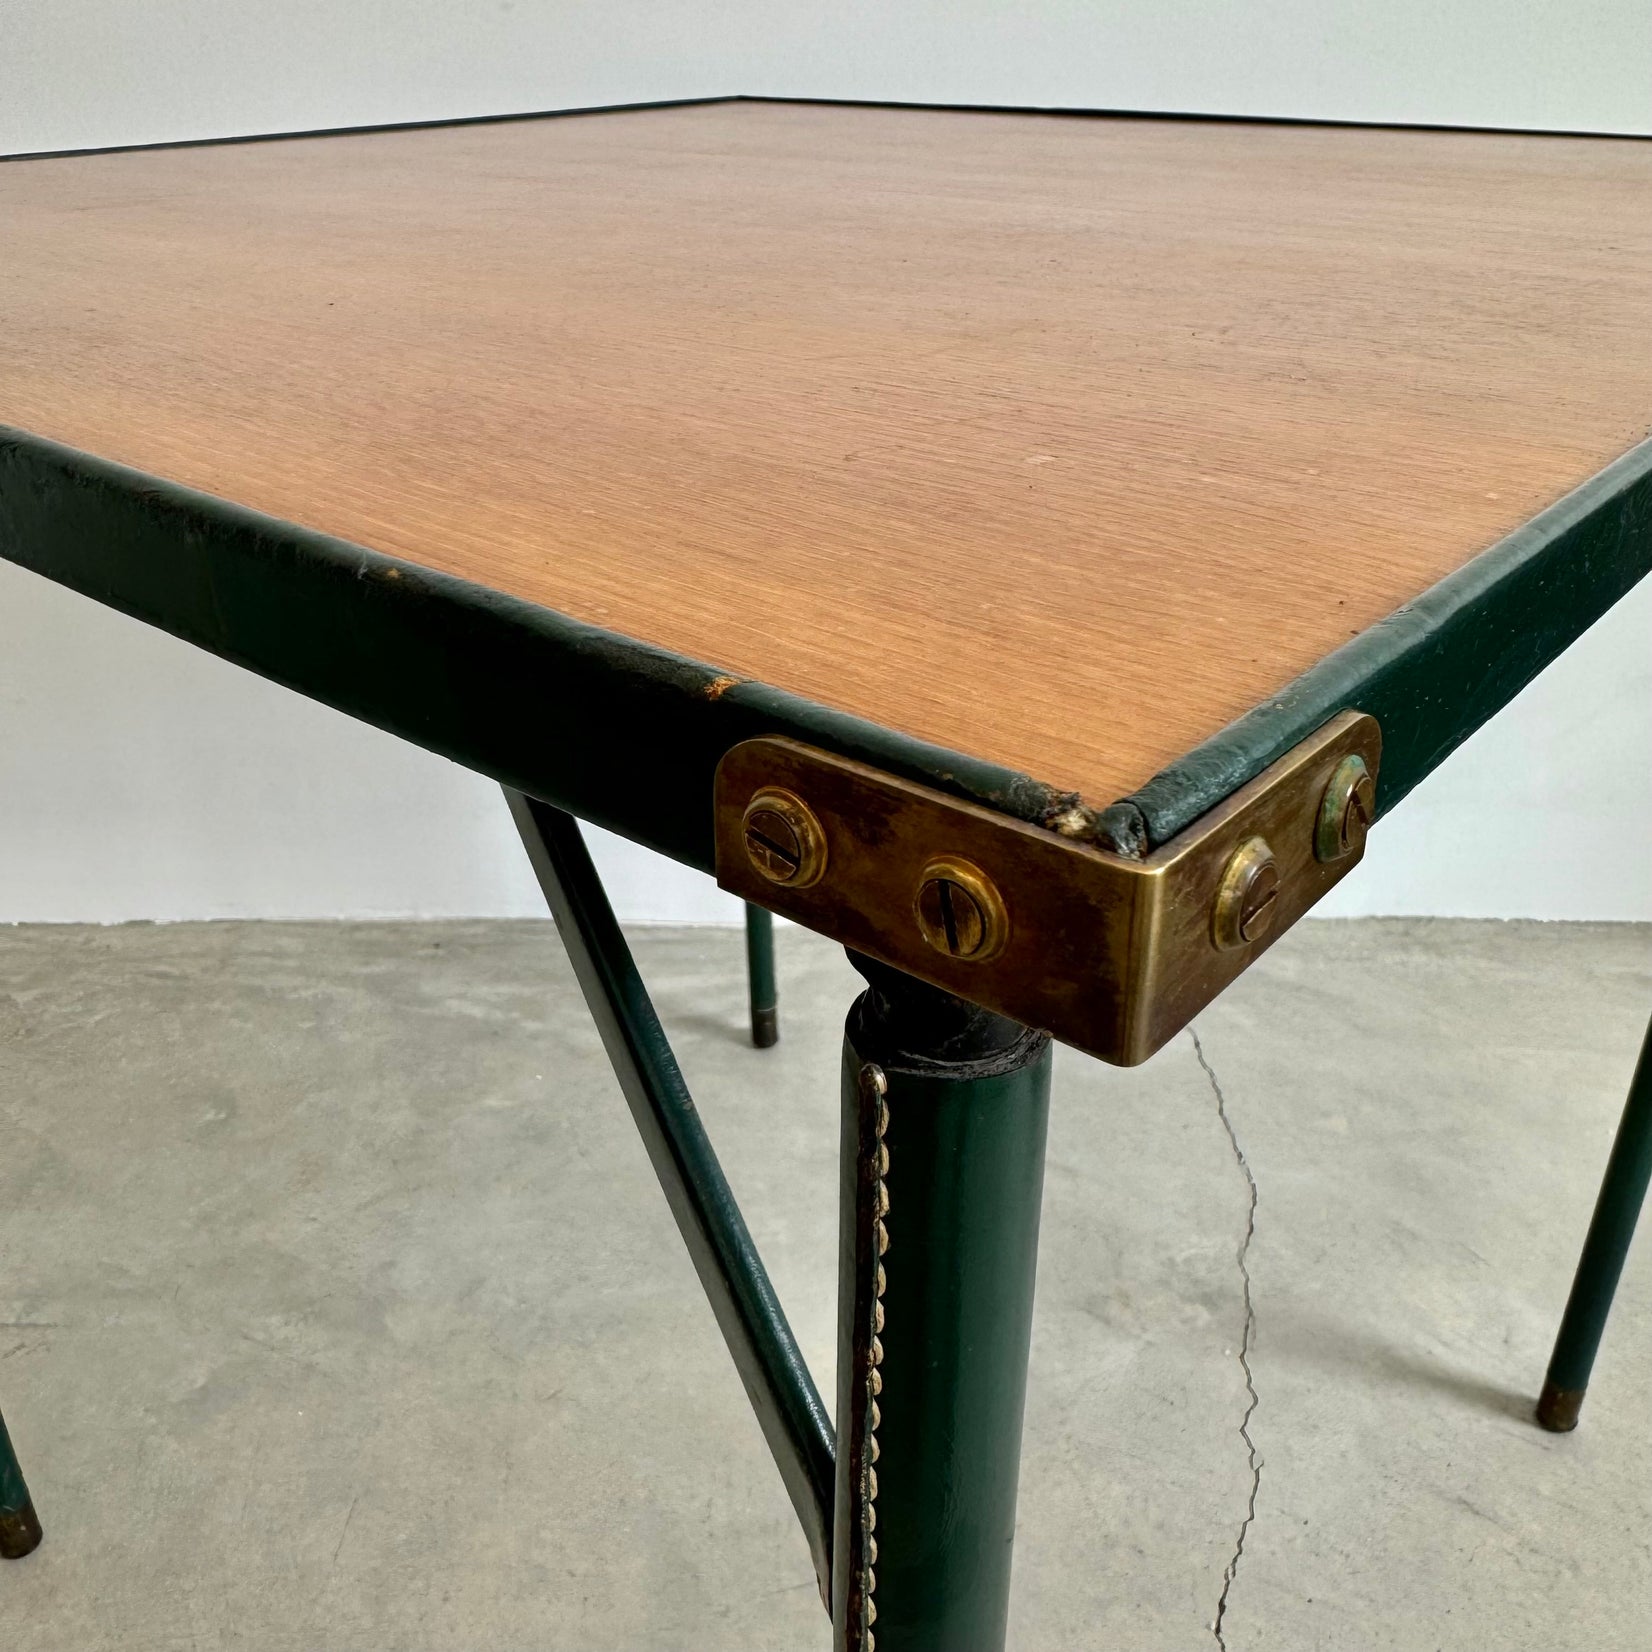 Jacques Adnet Green Leather and Wood Game Table, 1950s France